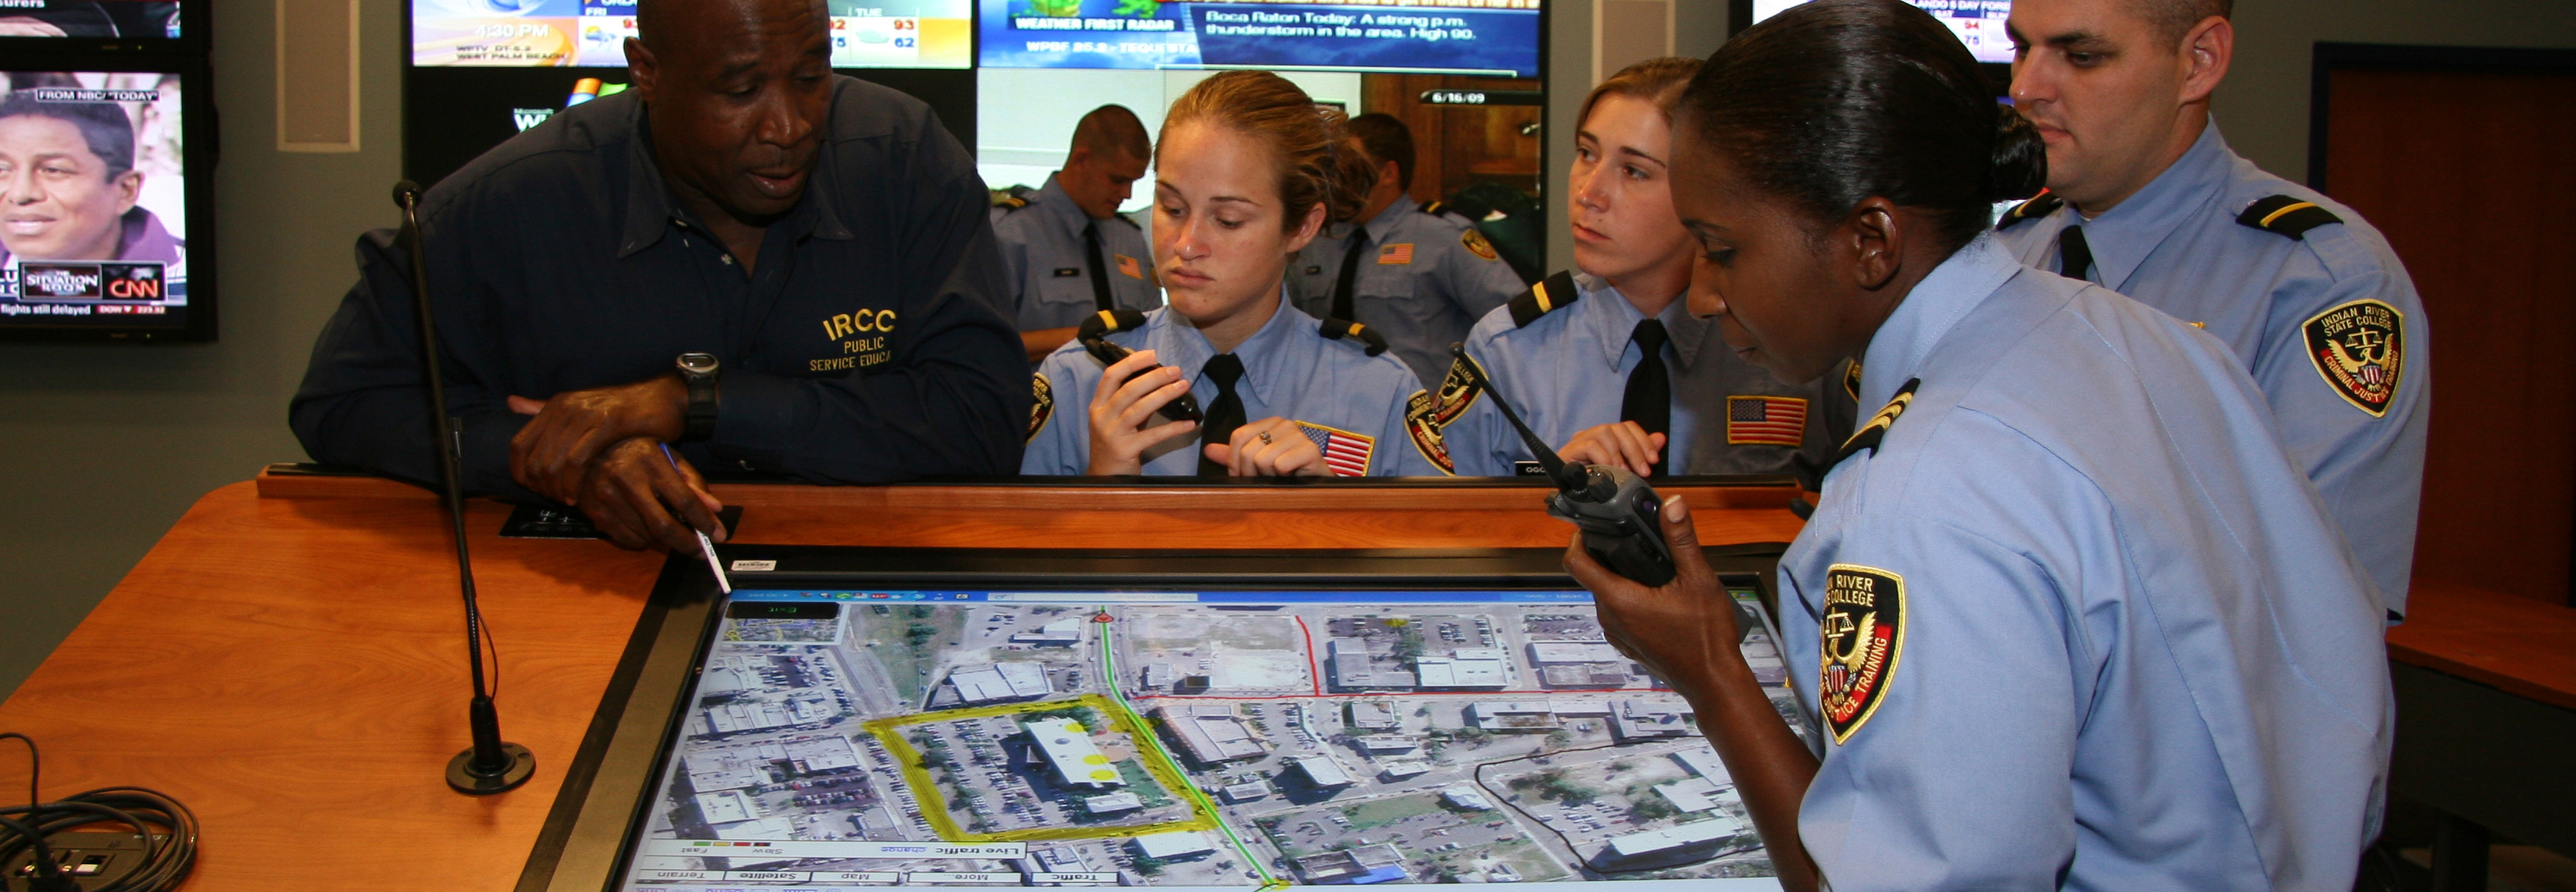 Students looking over screen in the Emergency Operations Center